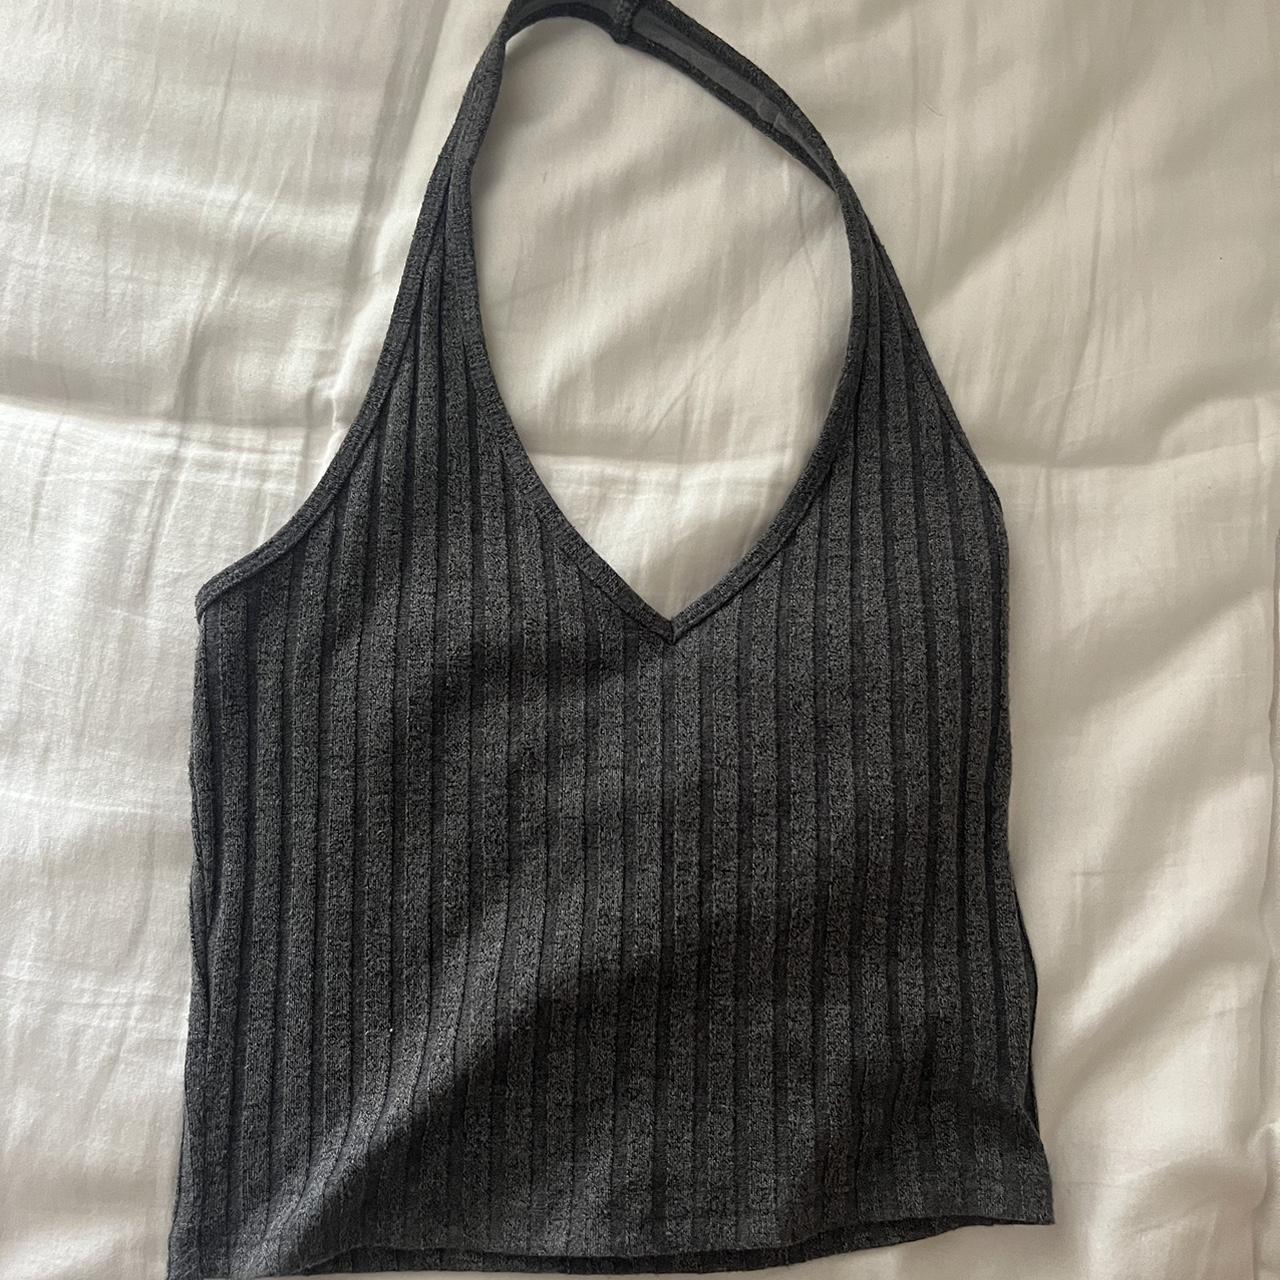 Halter Hollister top with a built in bra which gives... - Depop